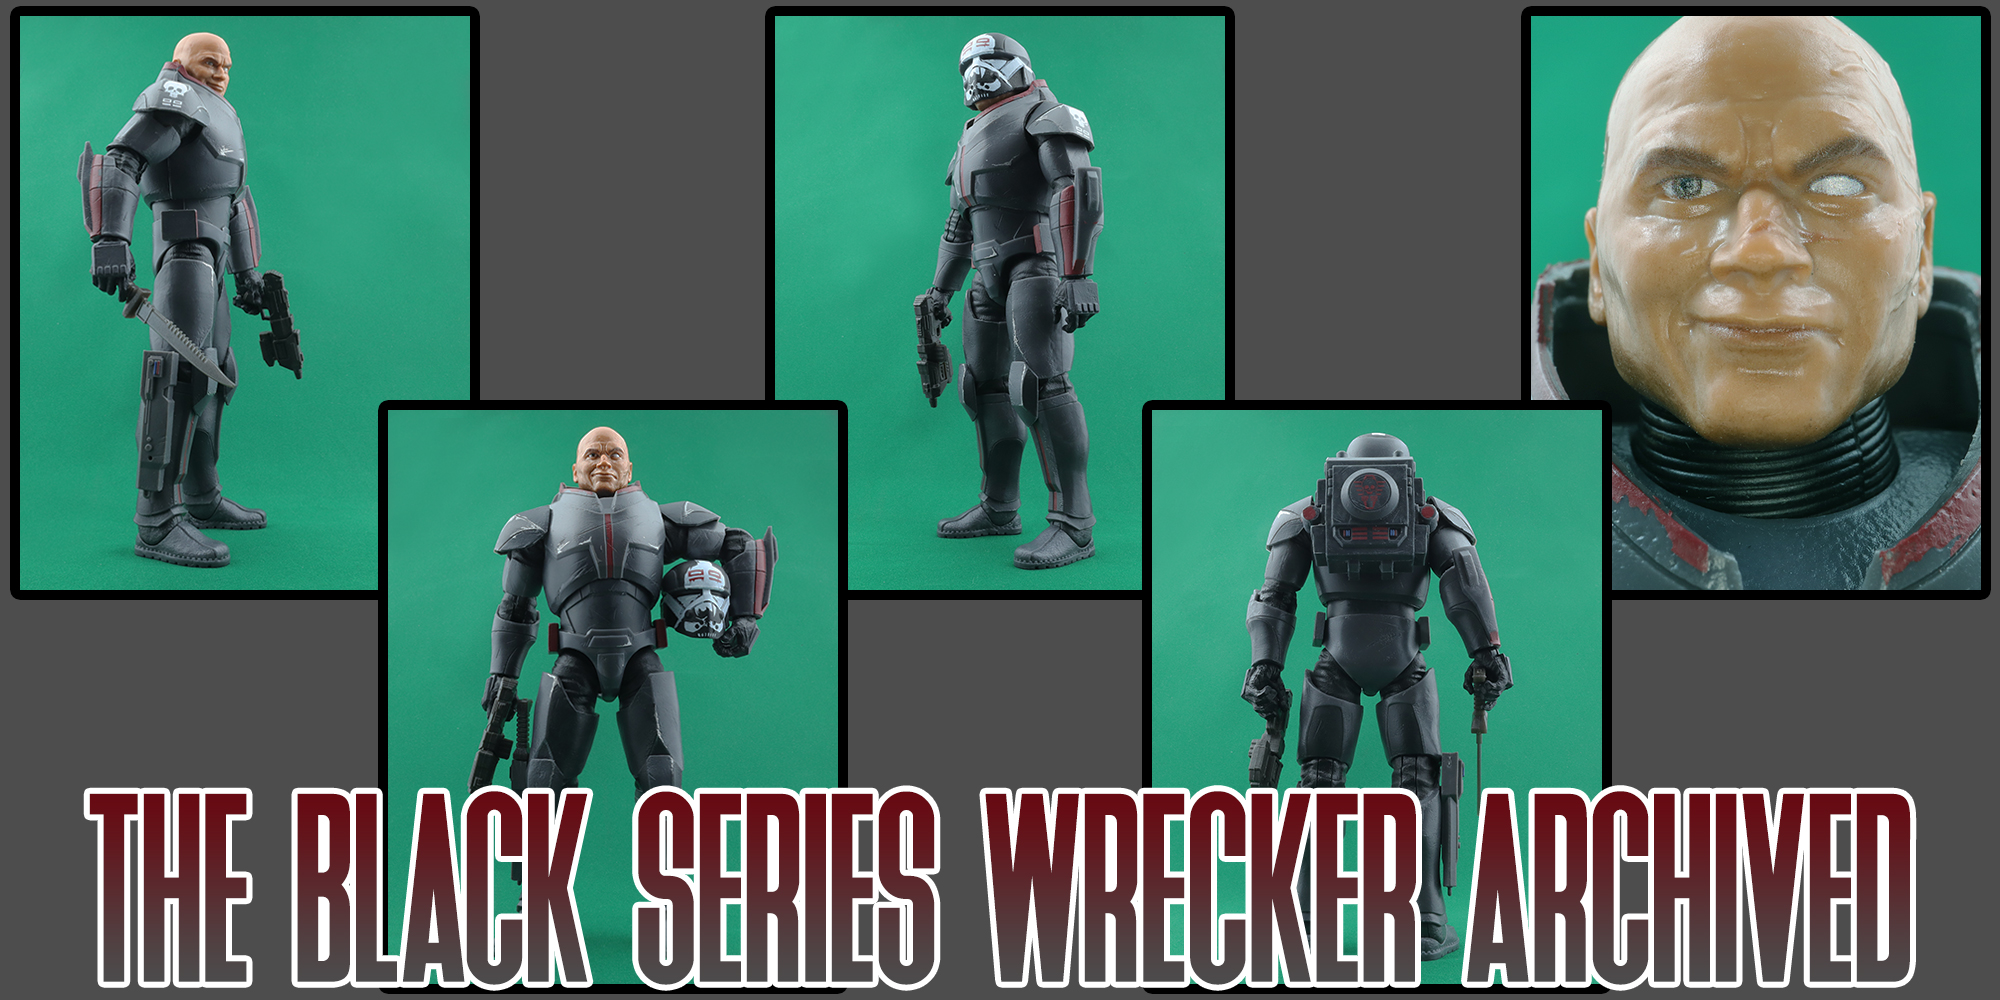 Wrecker (TBS) Archived